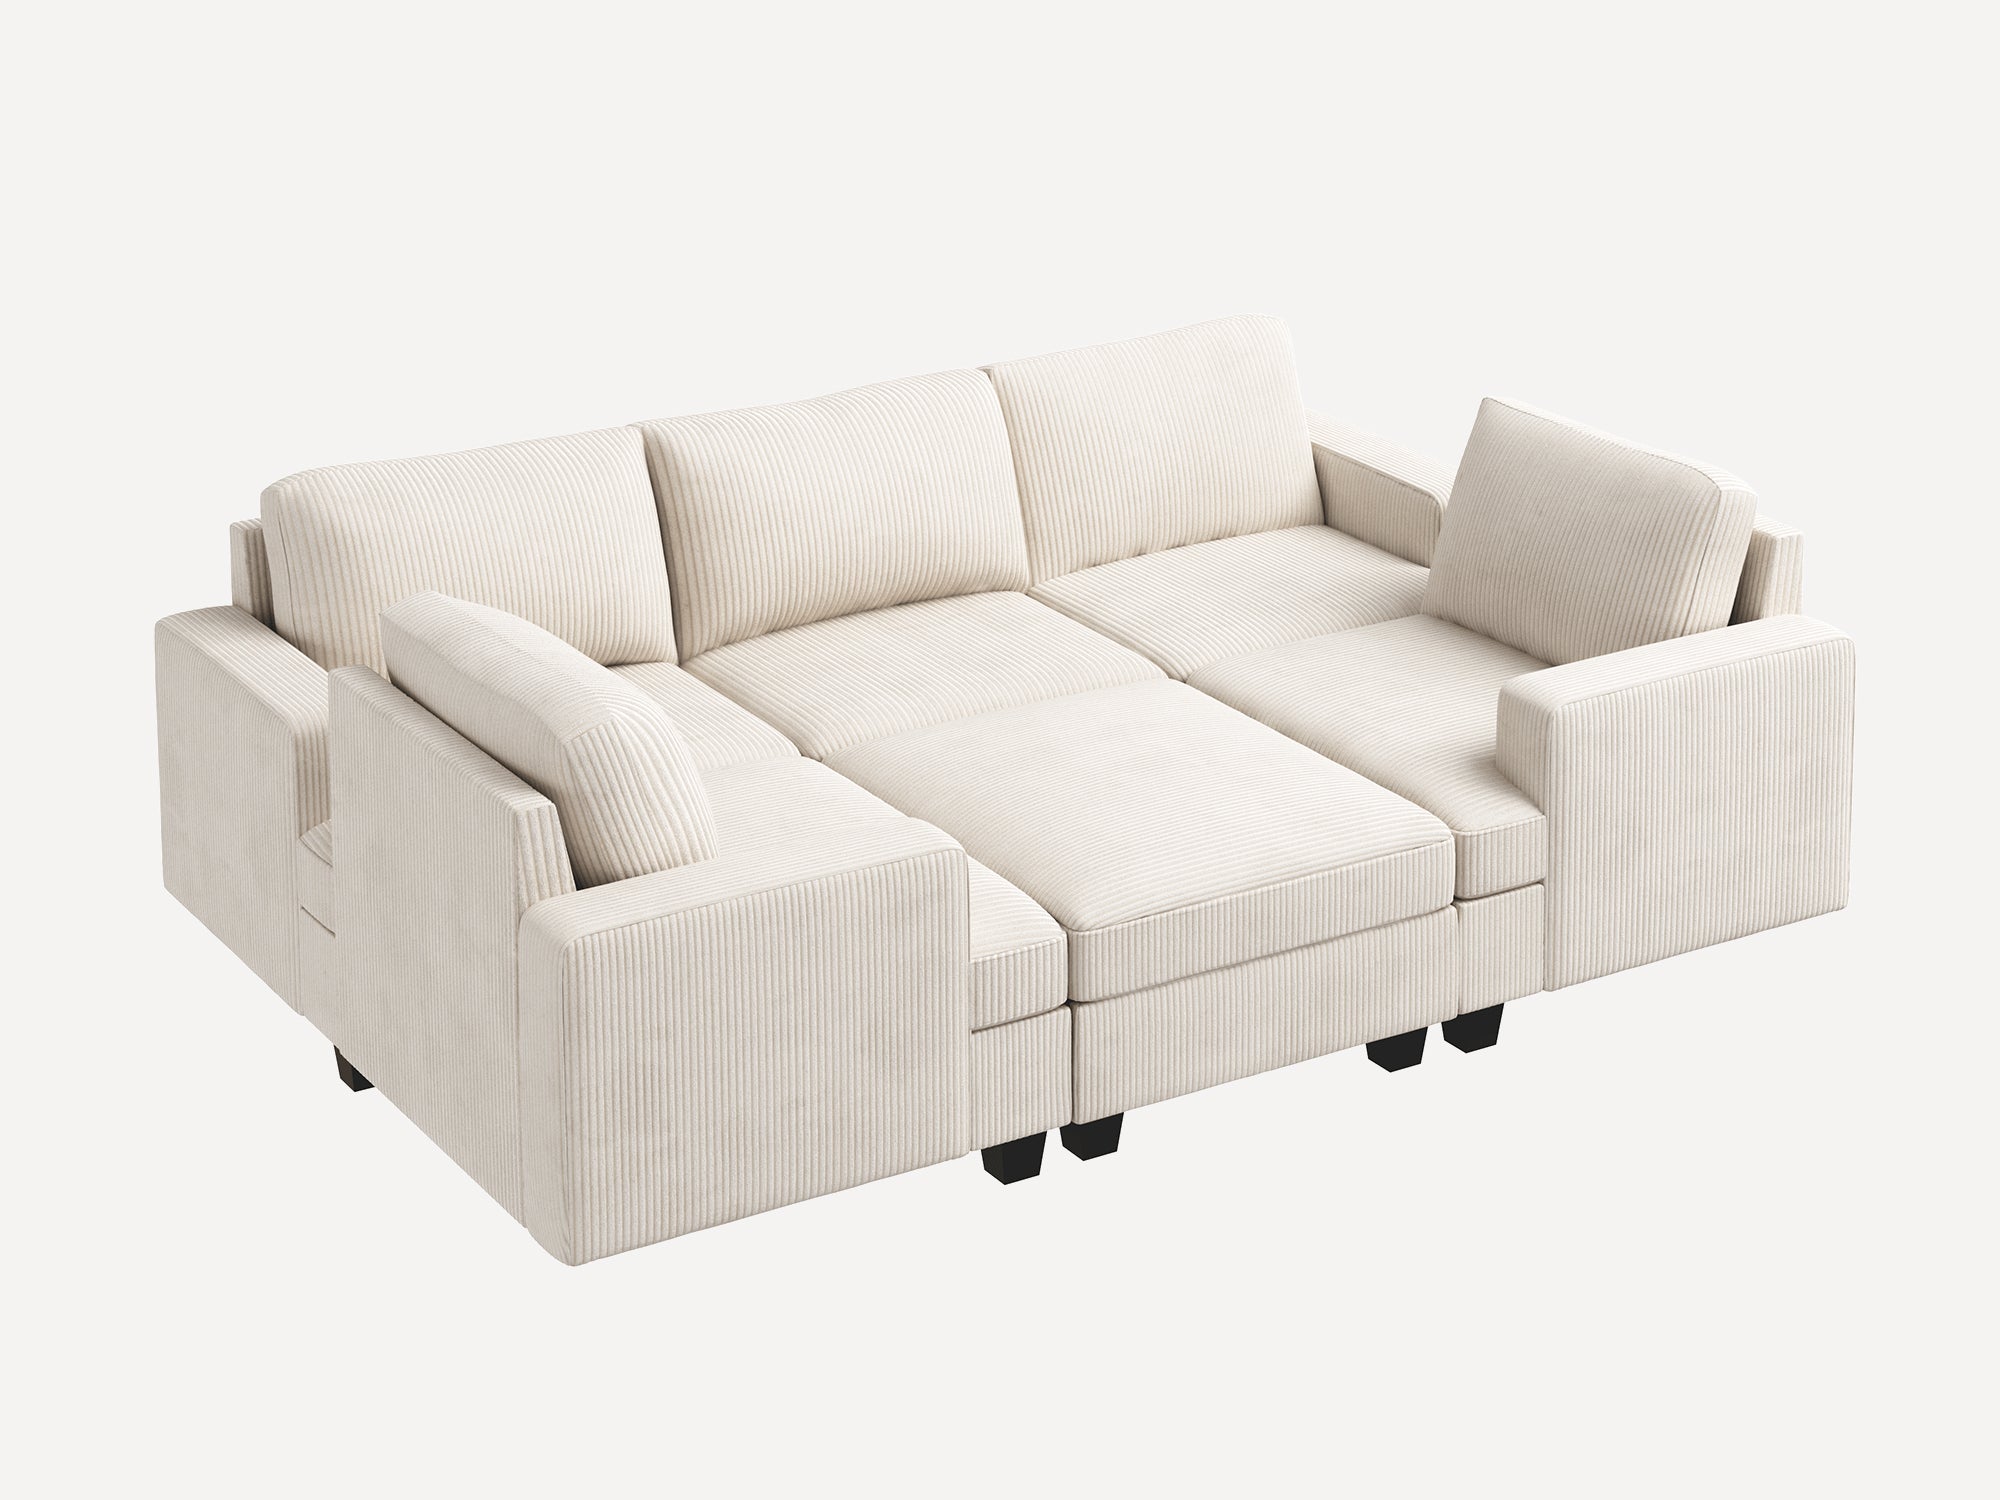 HONBAY 6-Piece Corduroy Modular Sleeper Lindyn Sectional With Storage Space #Color_Corduroy Beige